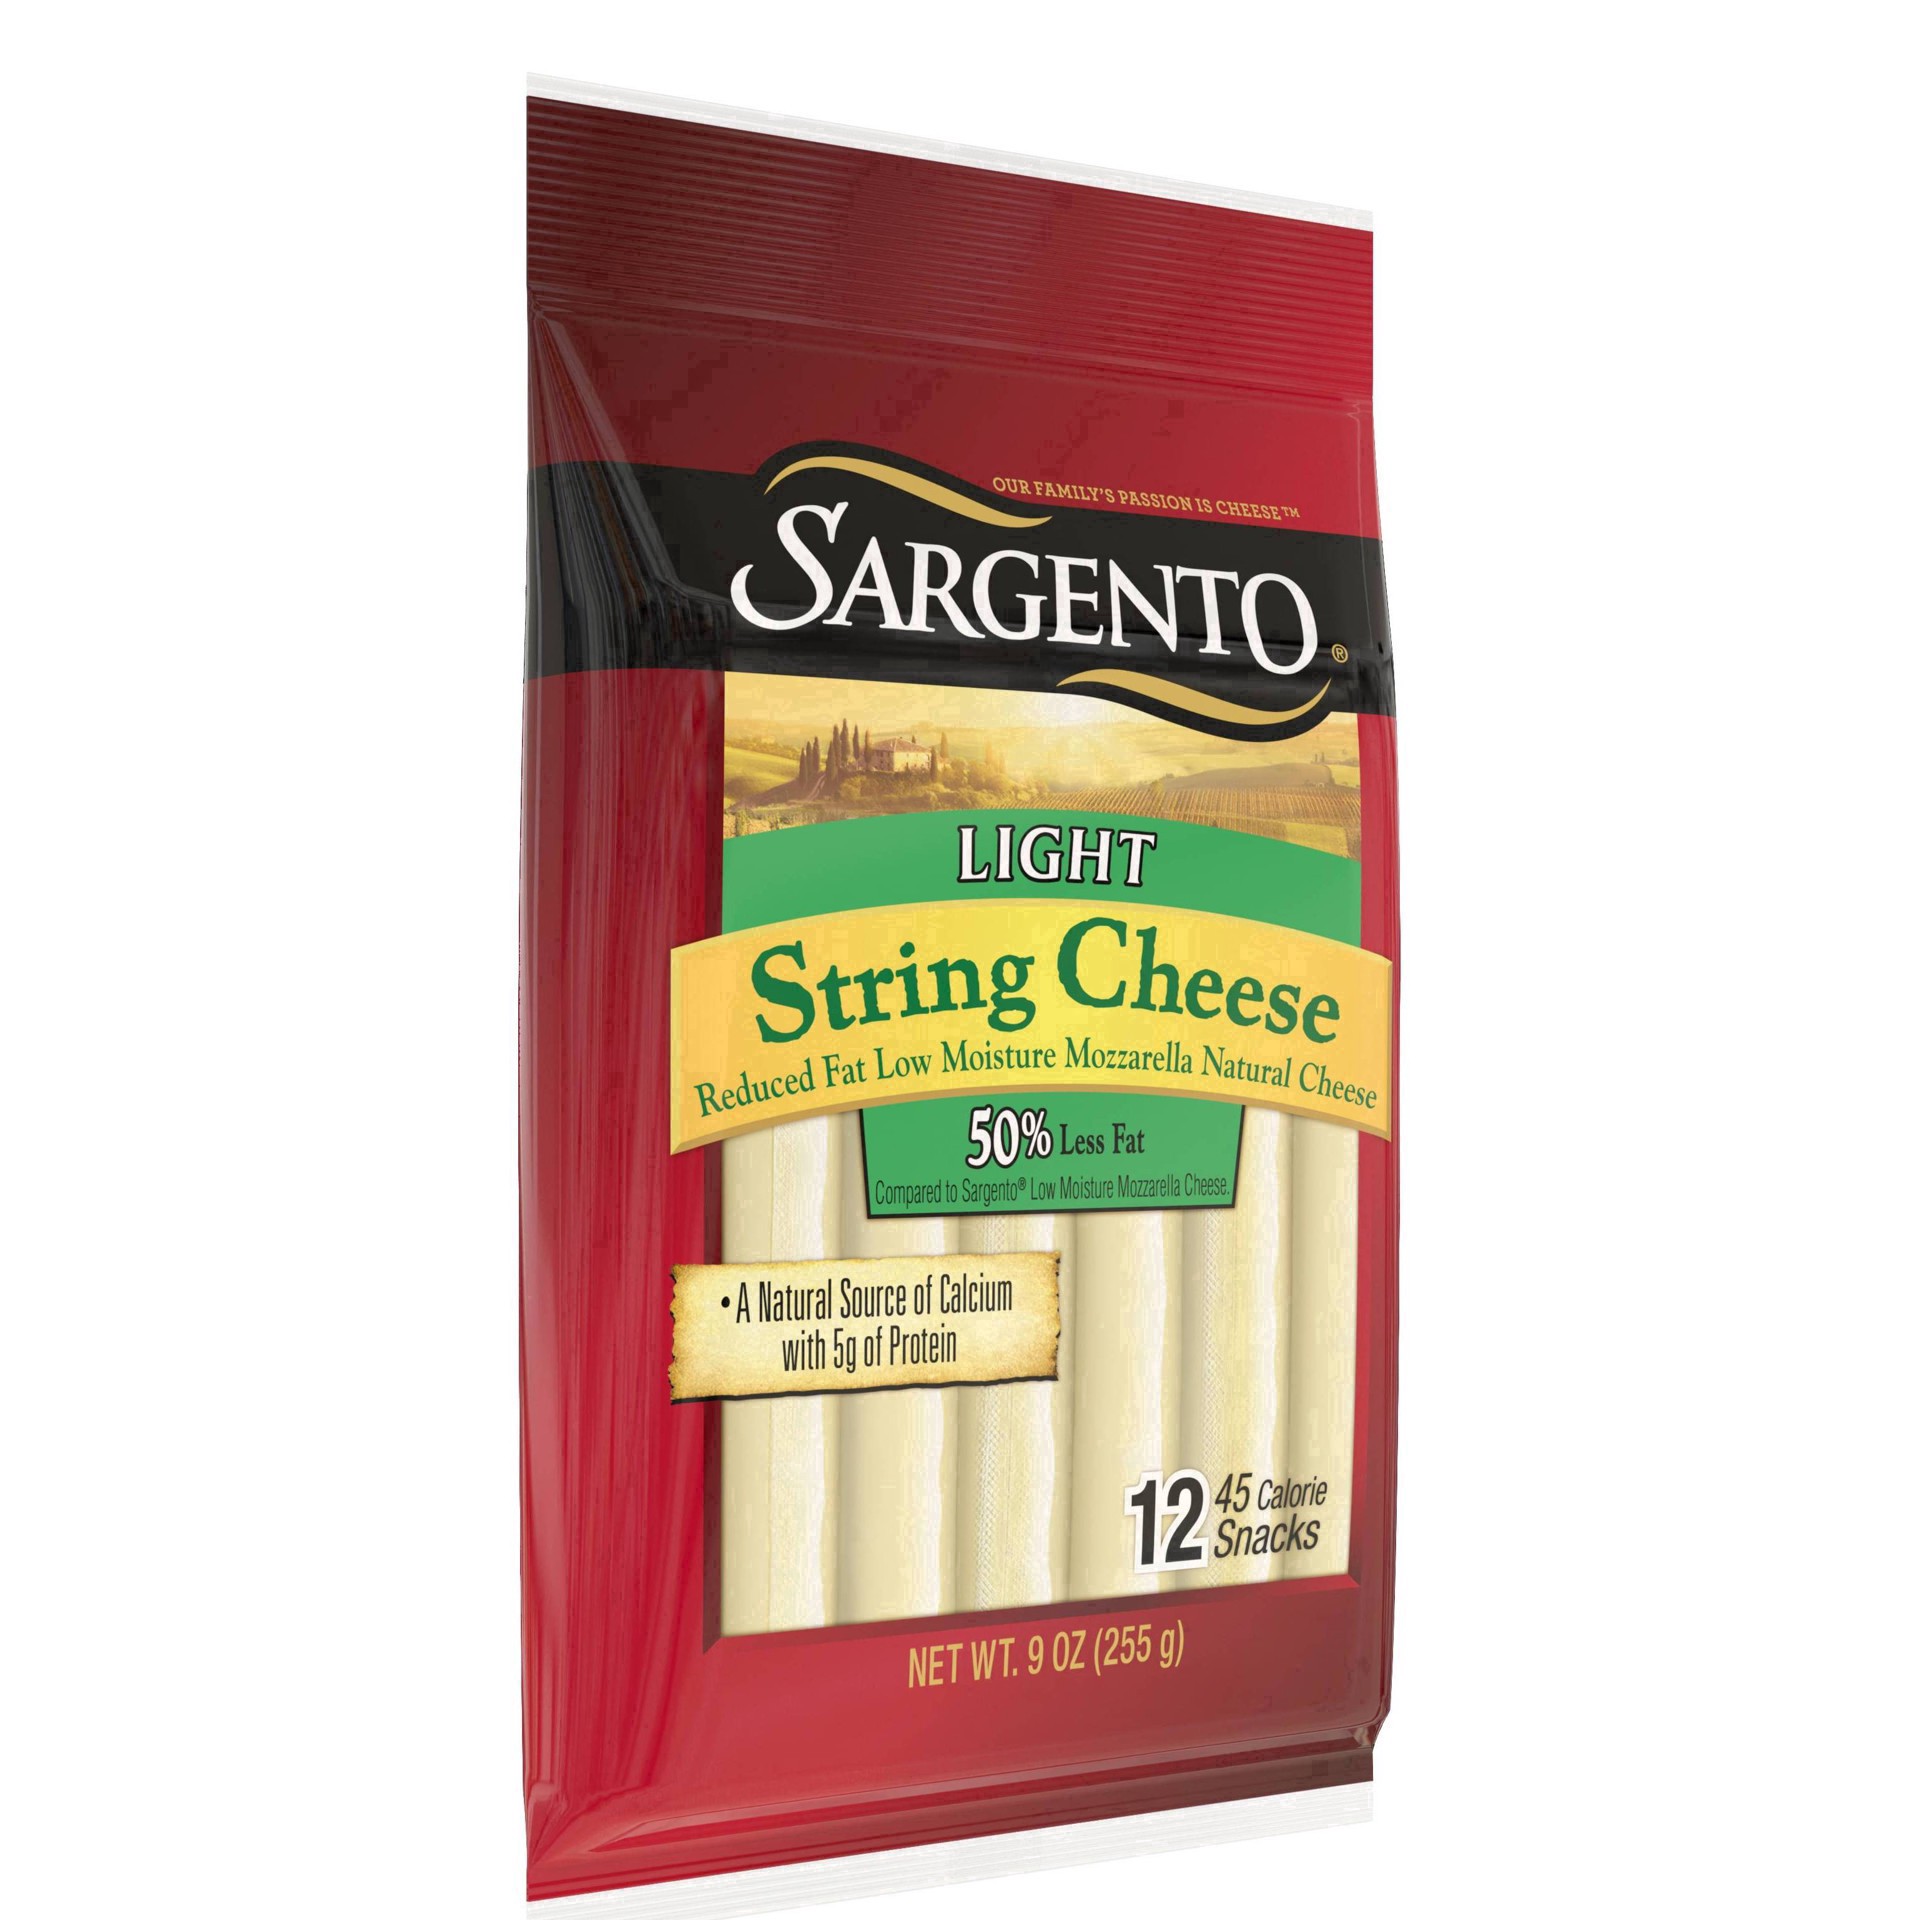 slide 6 of 62, Sargento Reduced Fat Low Moisture Part-Skim Mozzarella Natural Cheese Light String Cheese Snacks, 9 oz., 12-Count, 9 oz